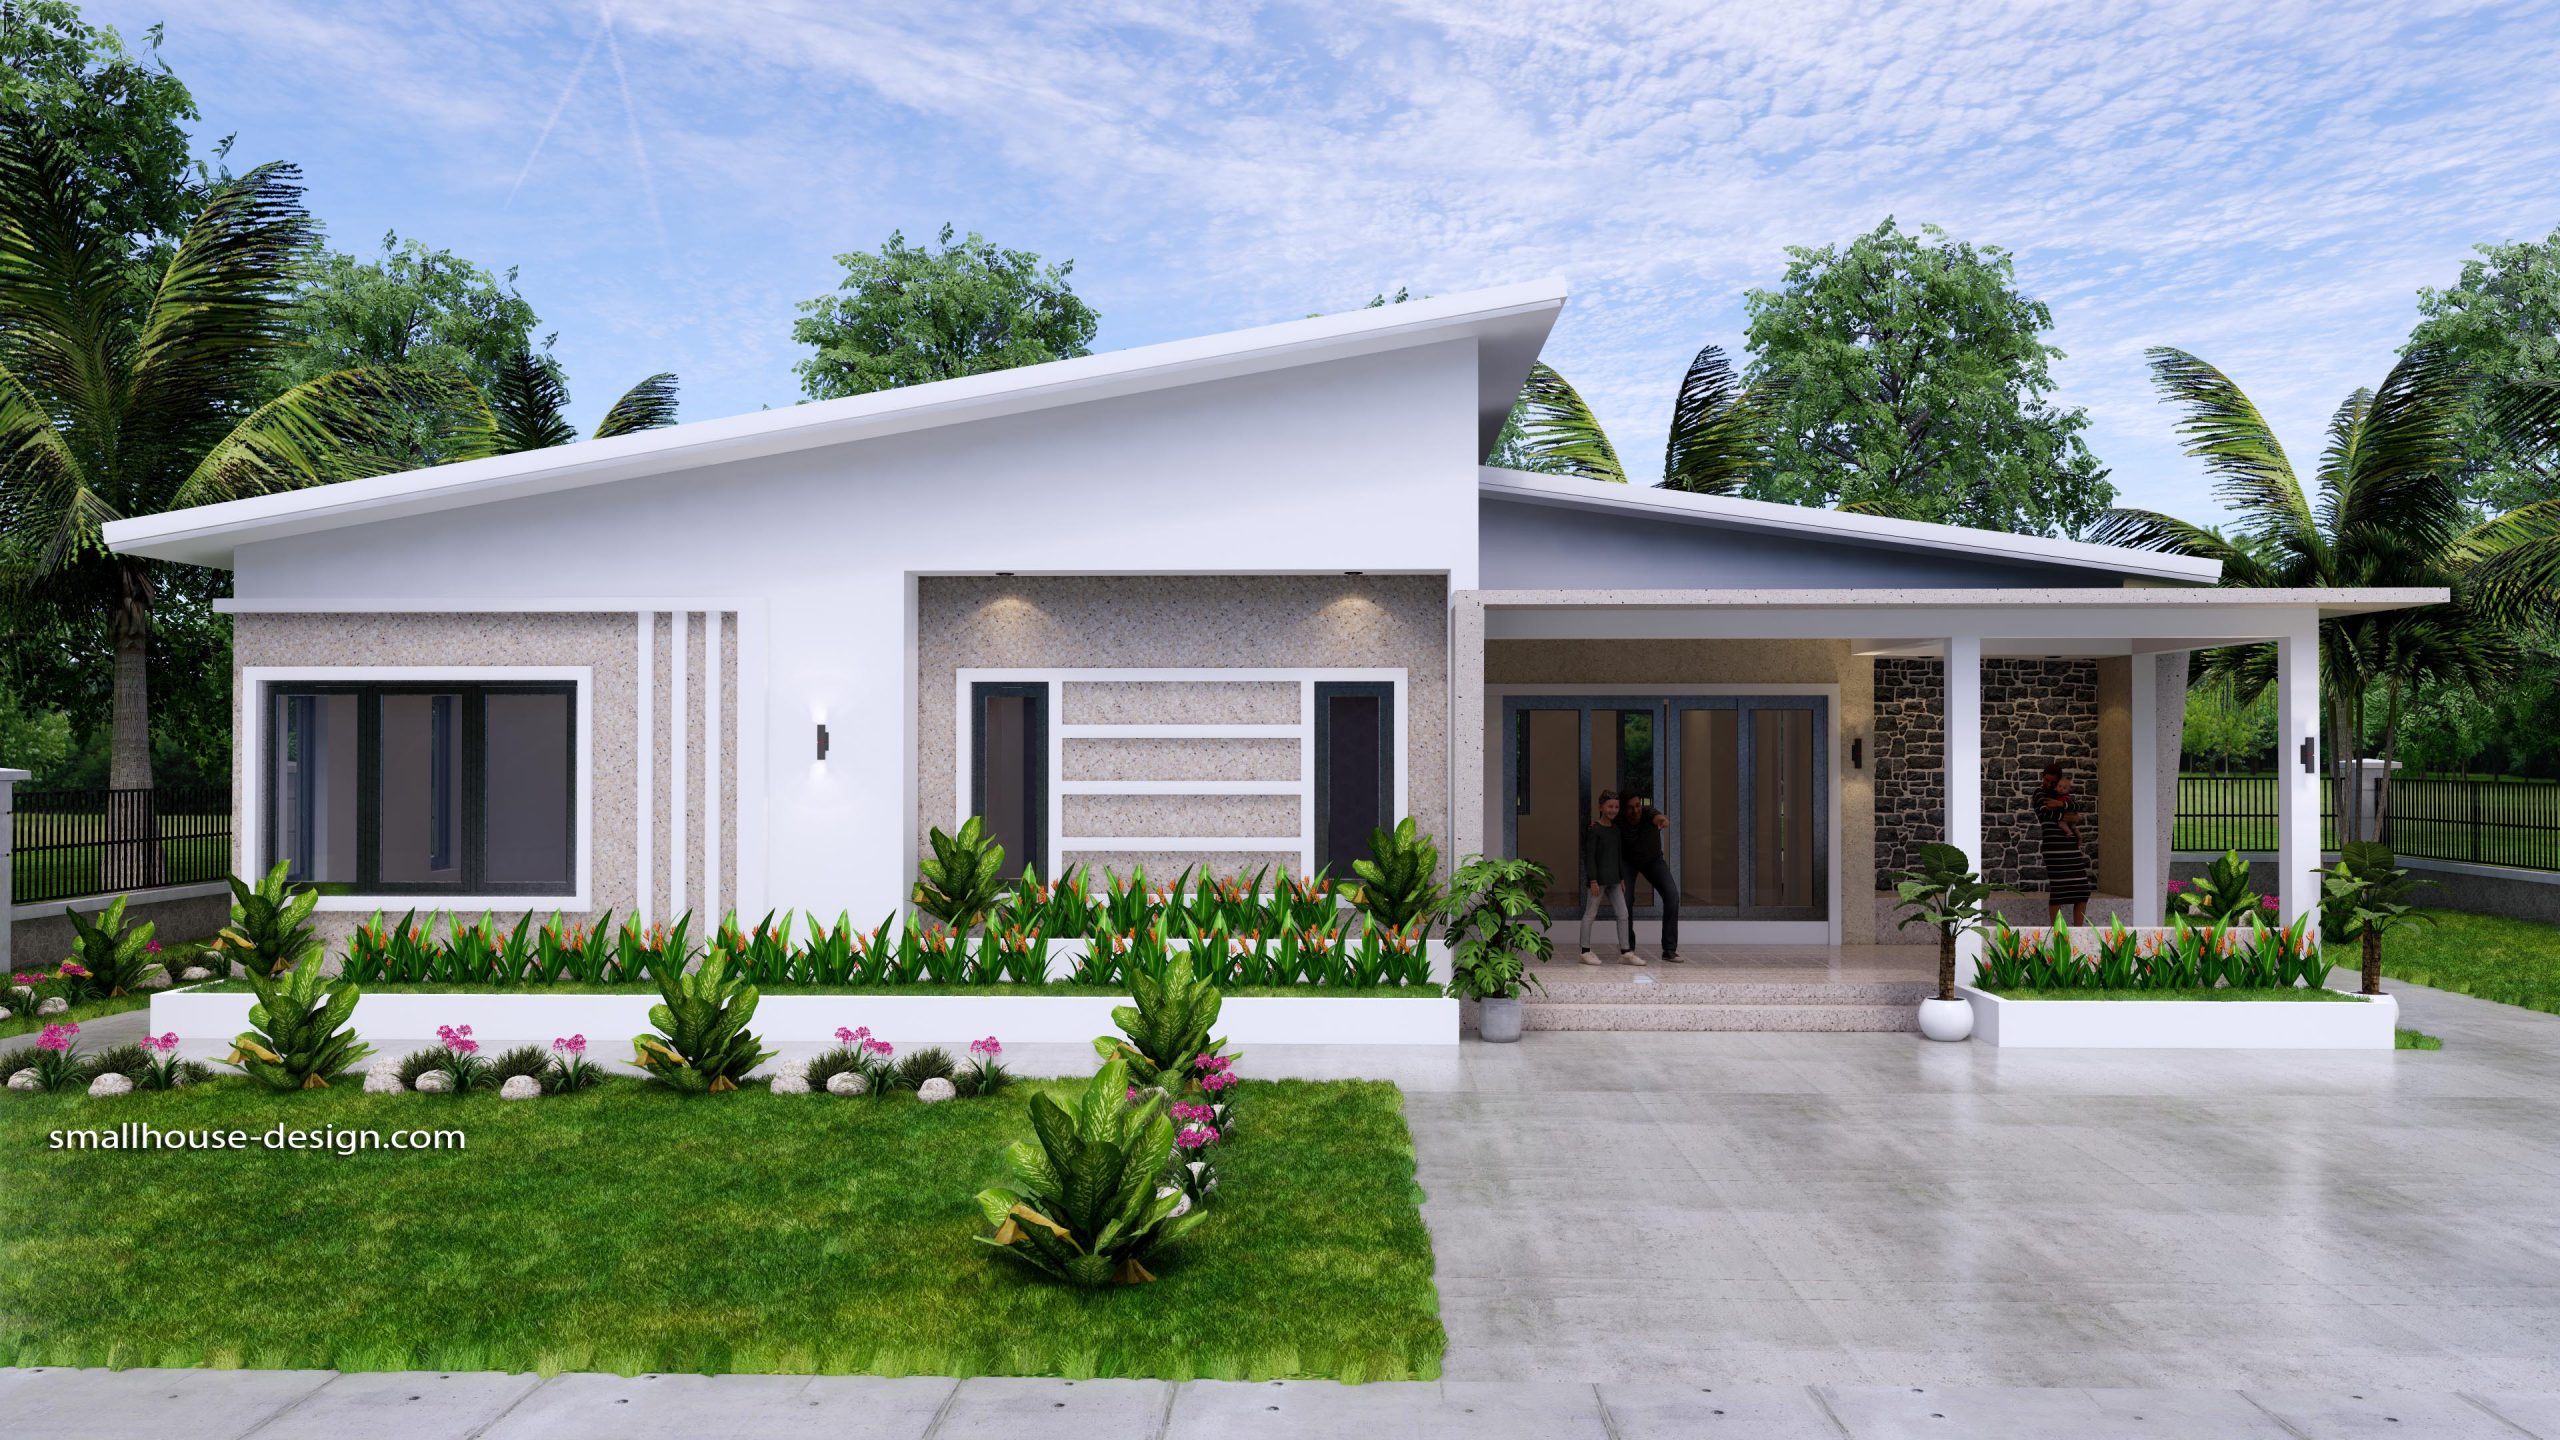 49x30 Small House Design 15x9 Meter 3 Beds - Small House Design Plan